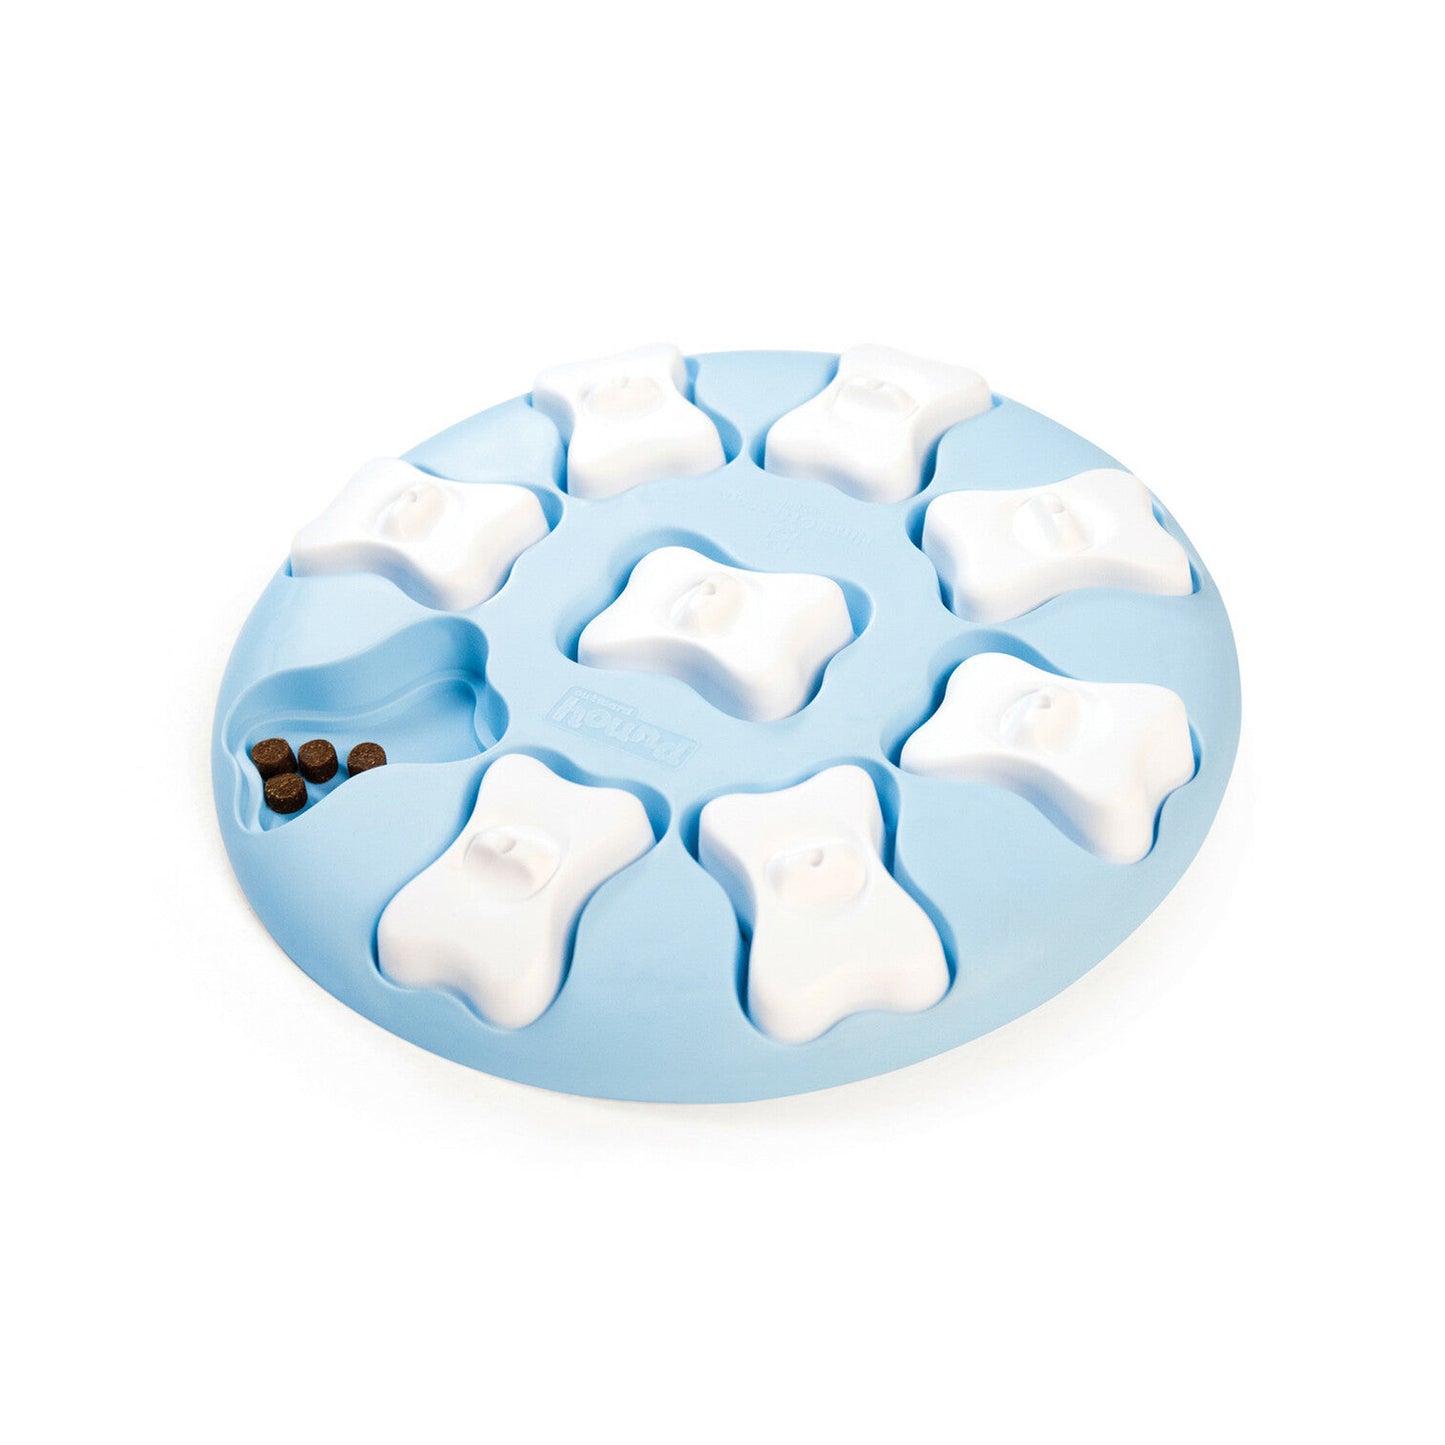 Outward Hound - Puppy Smart Interactive Treat Puzzle For Dogs